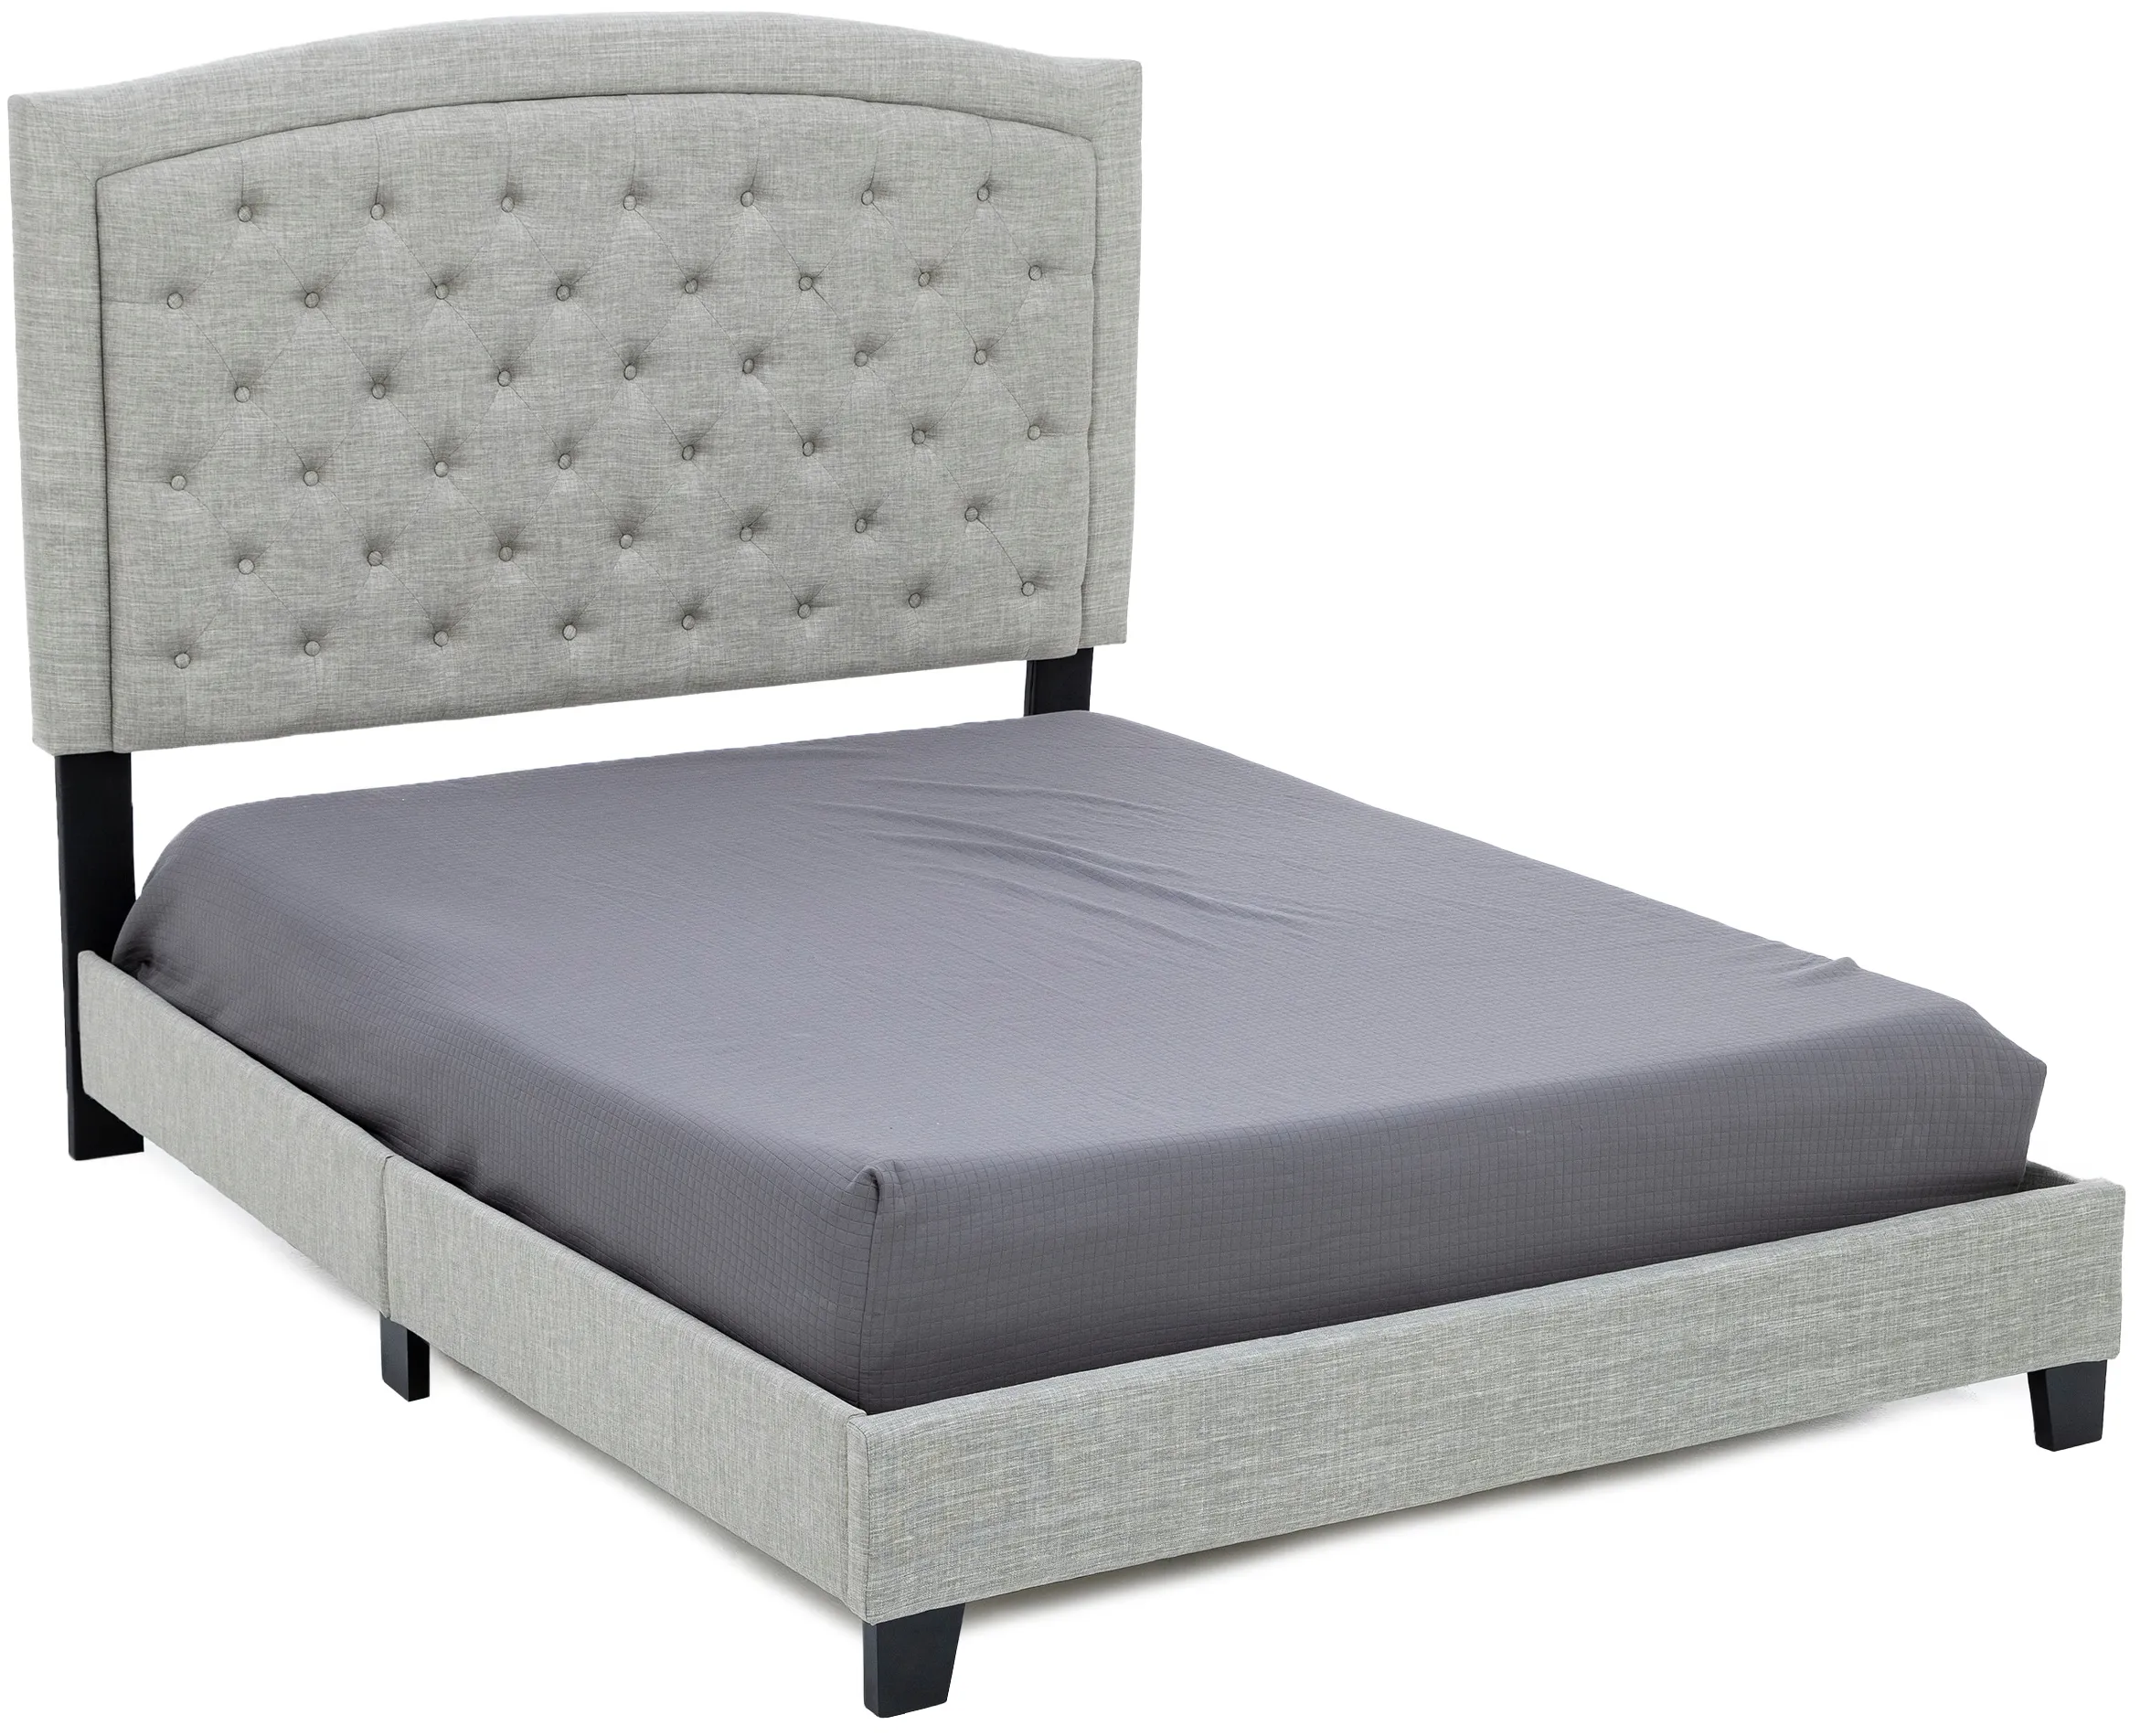 Justine Queen Upholstered Bed